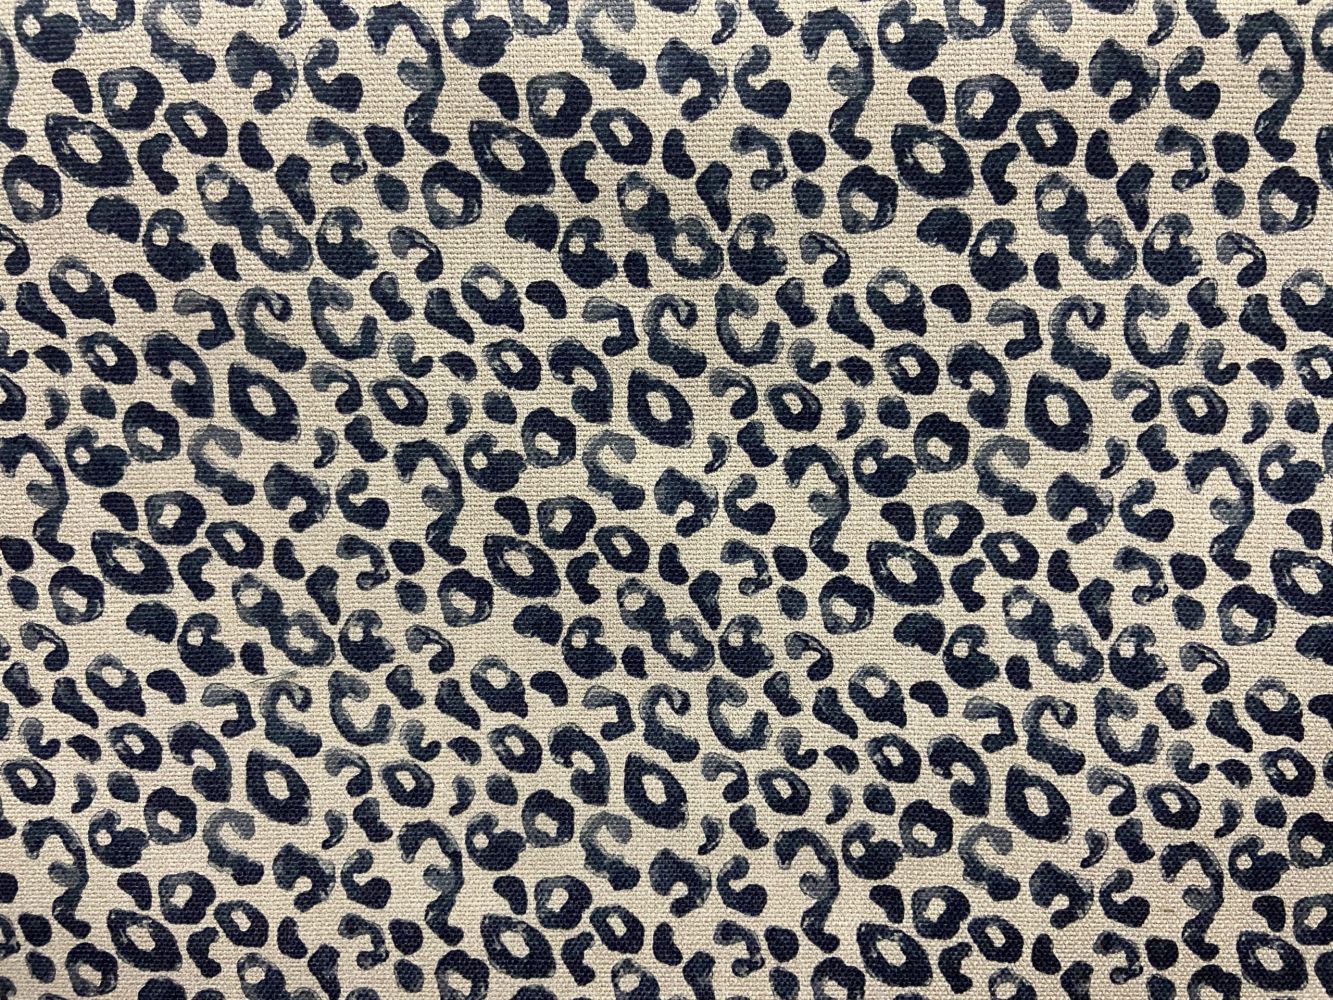 Grey Leopard Fabric, Wallpaper and Home Decor